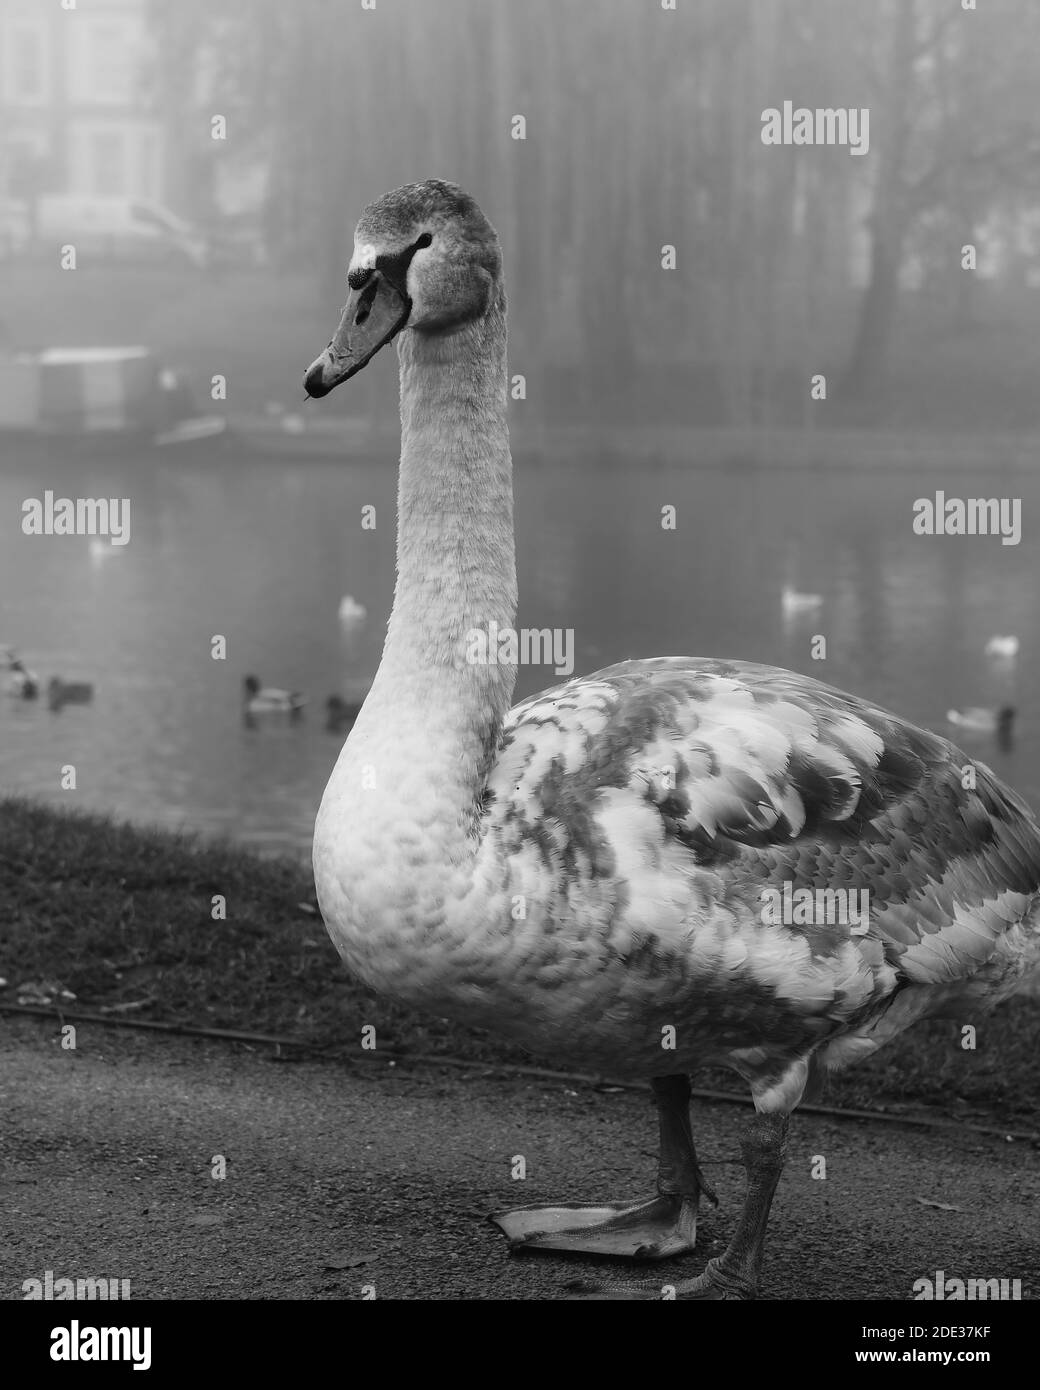 Juvenile swan with grey and white feathers standing on a foggy river bank Stock Photo